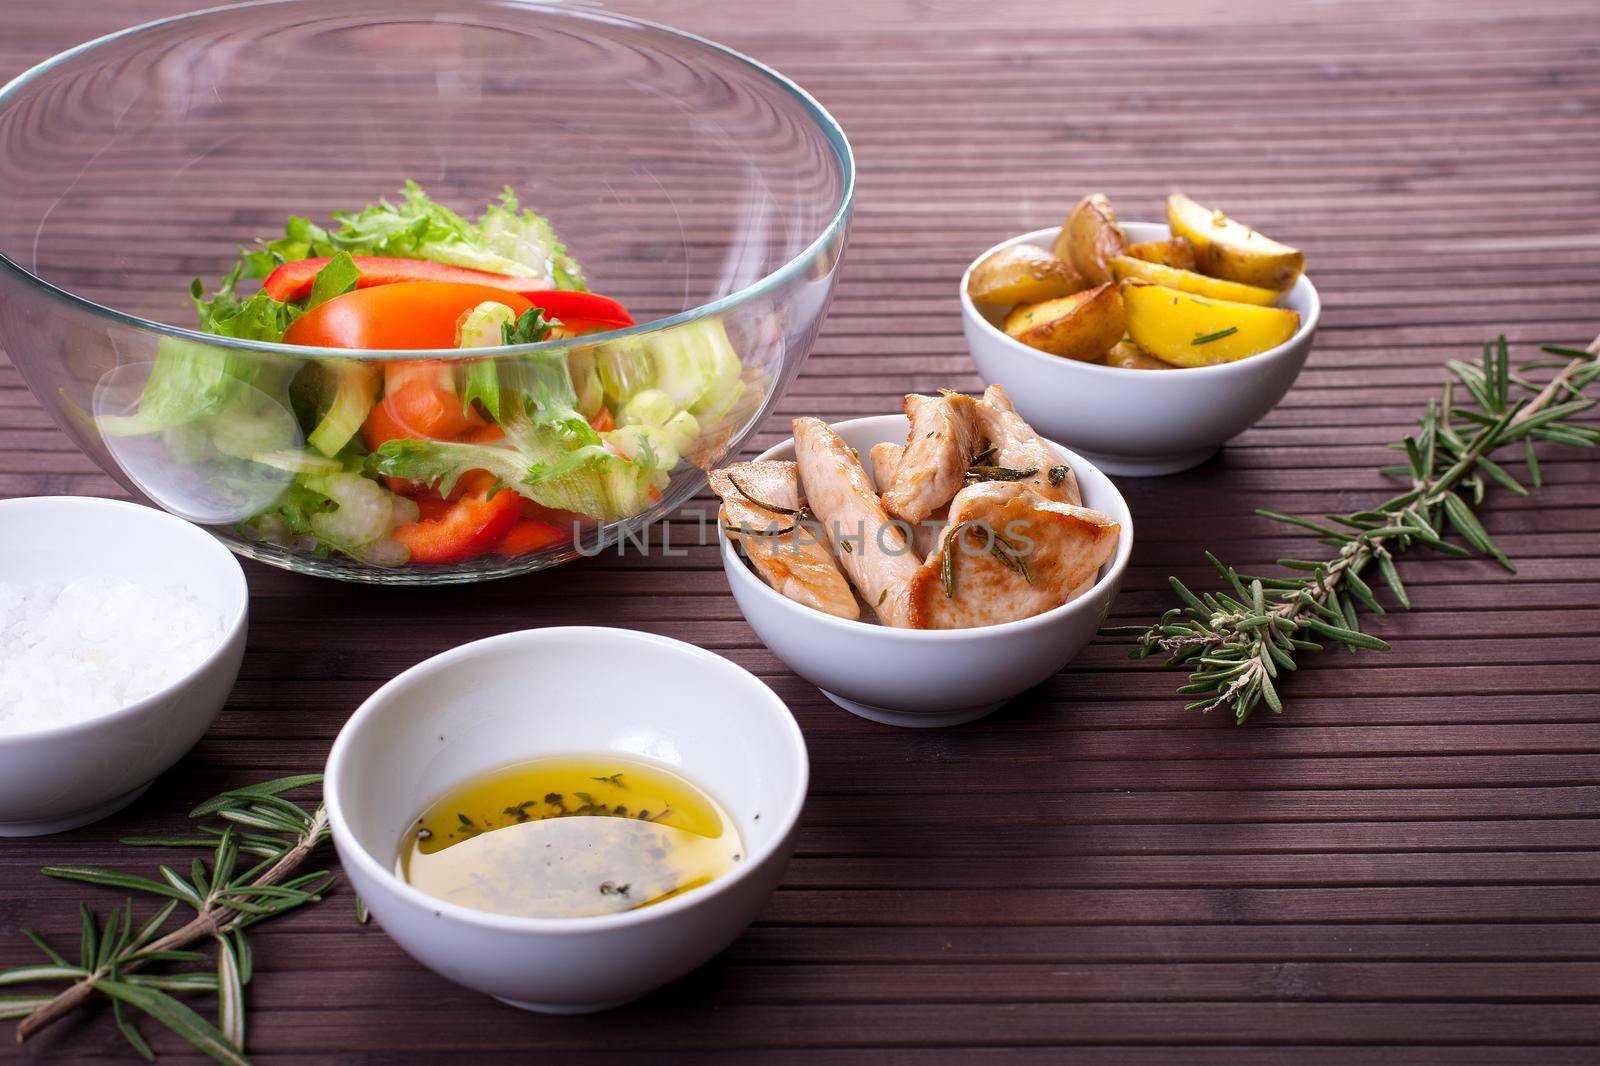 Ingredients for vegetable salad with chicken breast on a plate. Stock image.